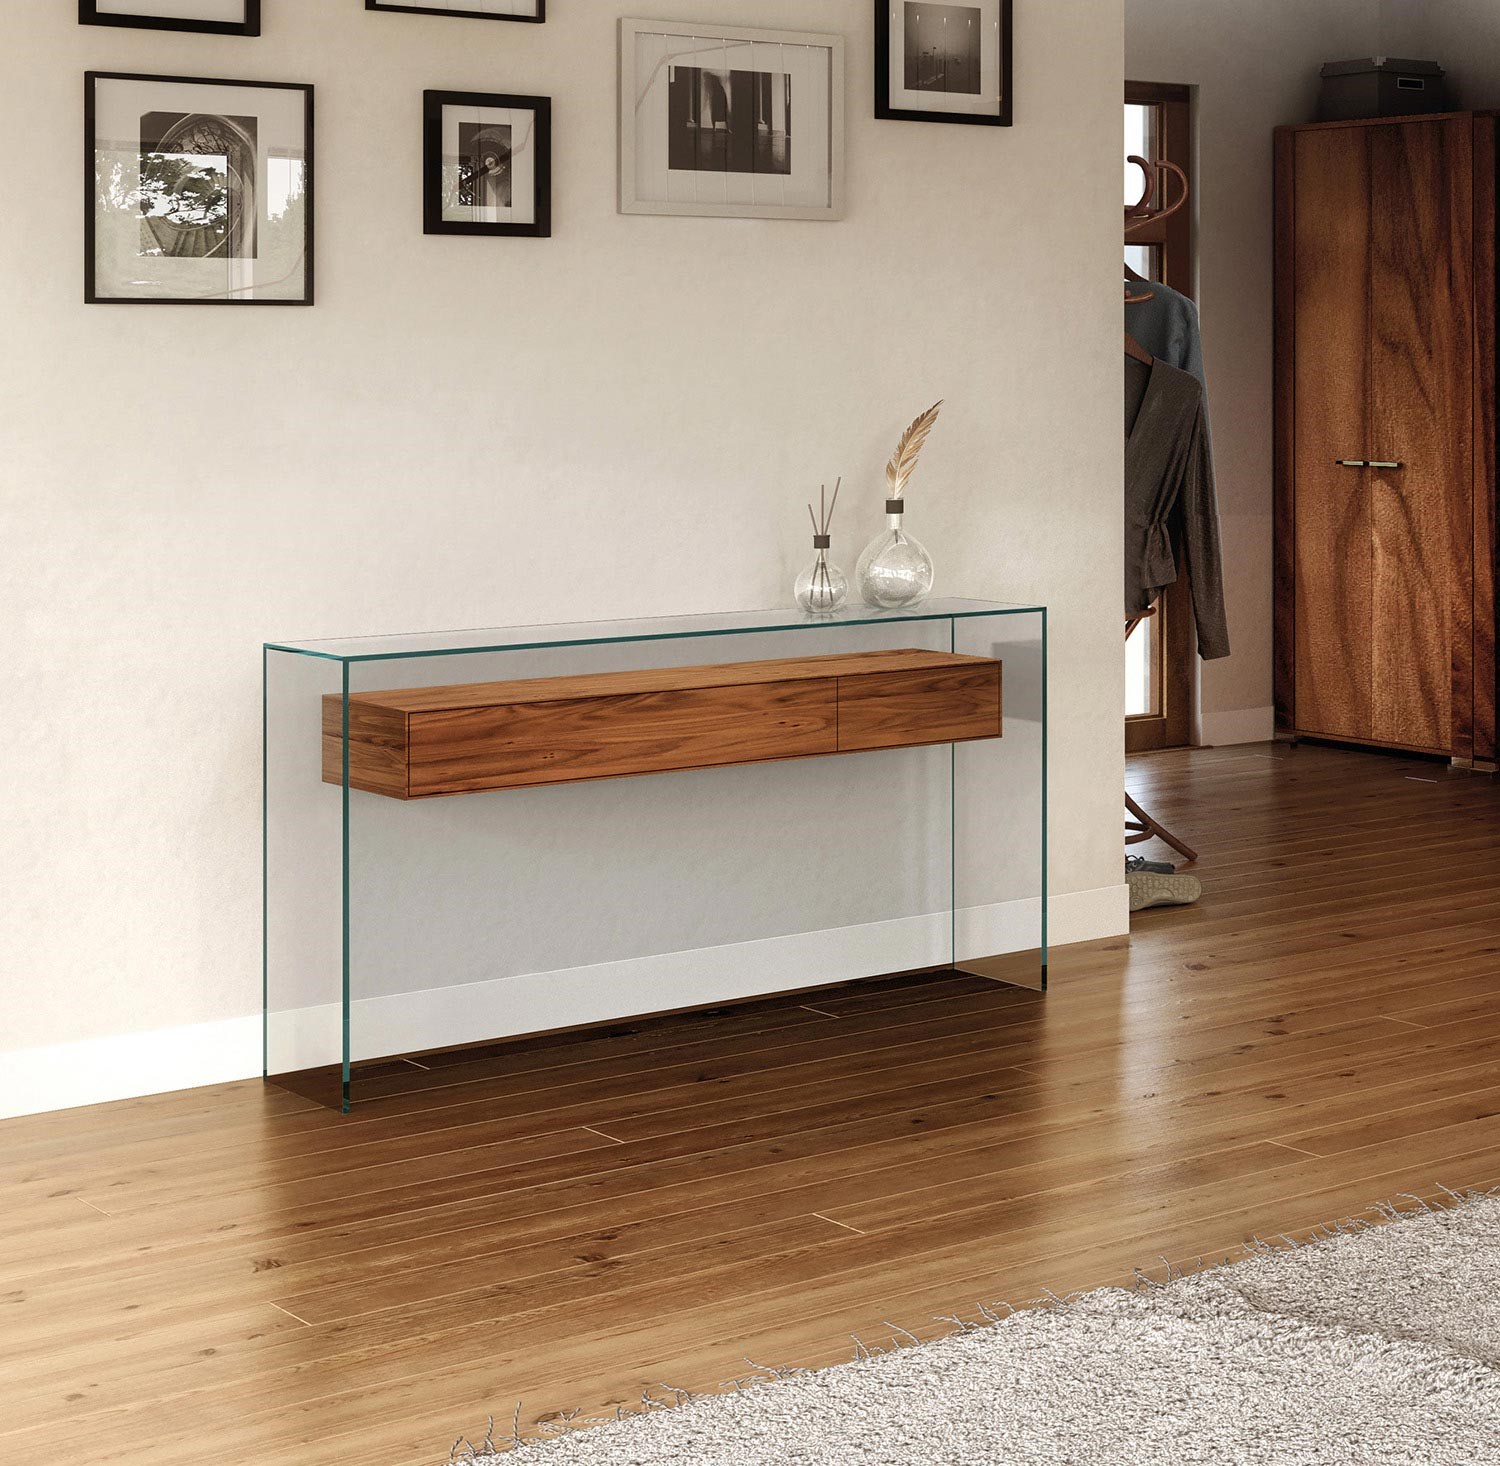 Glass console table with drawers FLY 127 by DREIECK DESIGN - OPTIWHITE - drawer element solid wood walnut